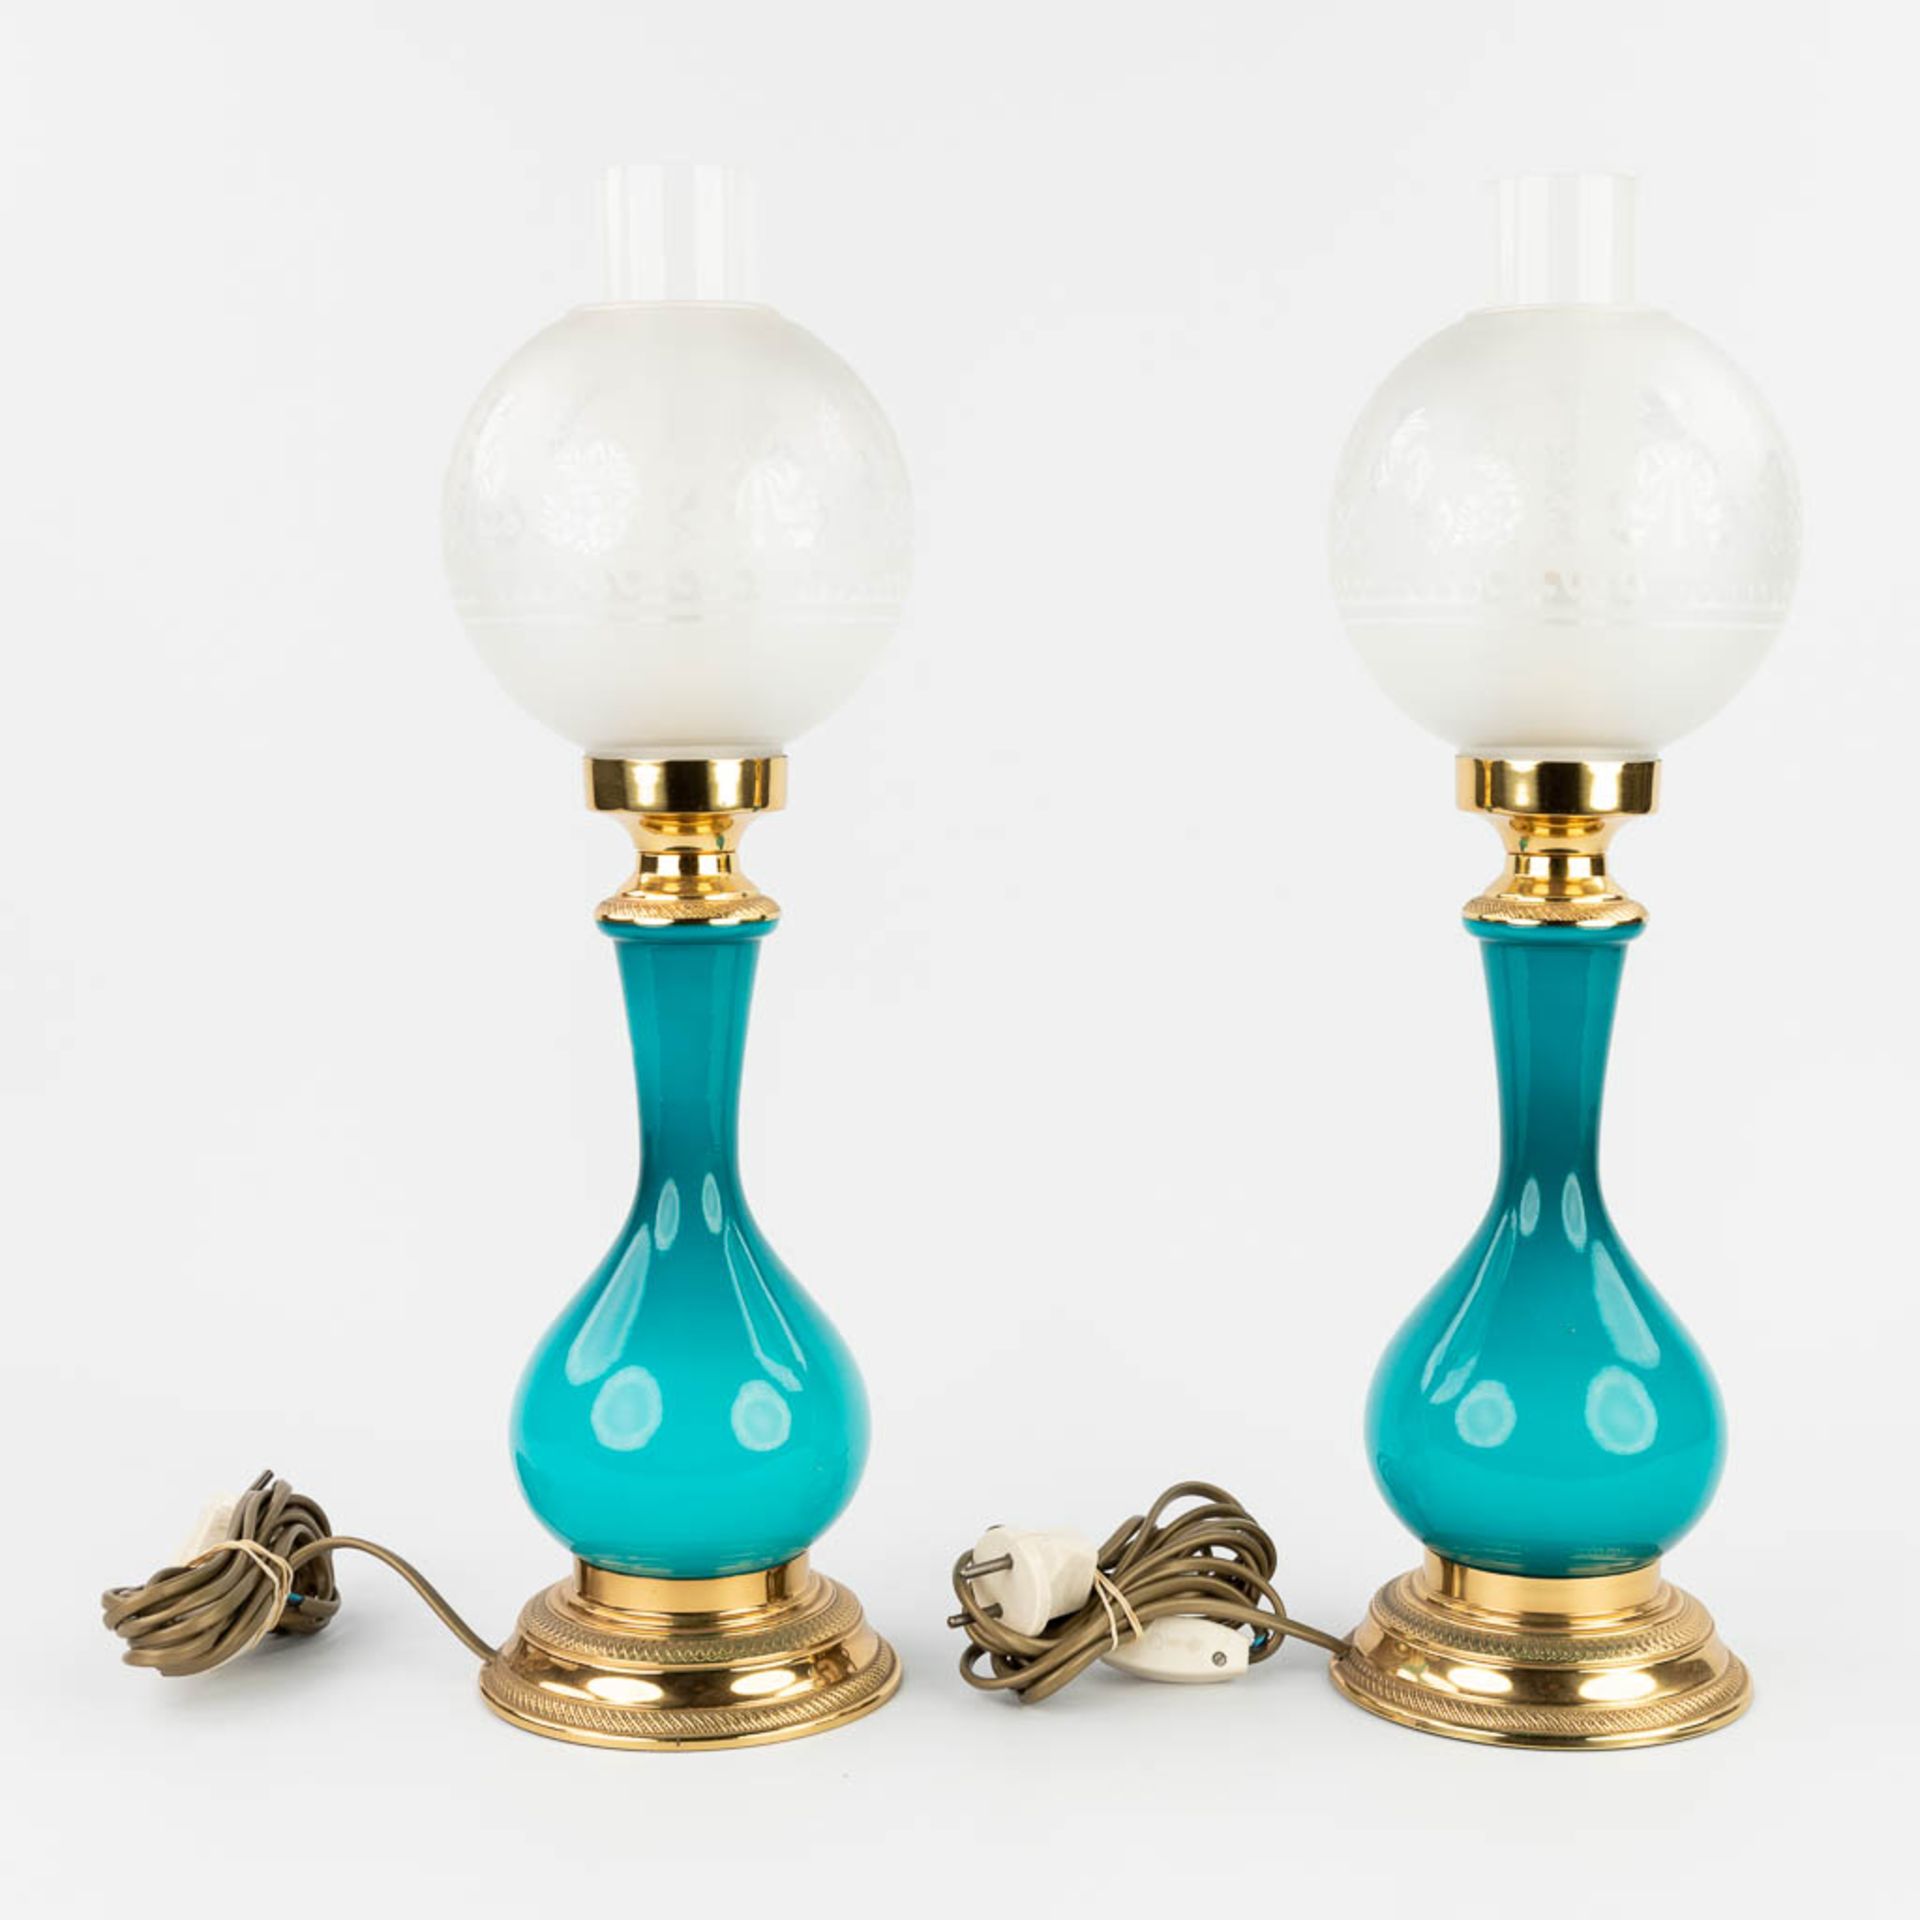 A pair of table lamps, opaline blue glass mounted with bronze. 20th C. (H: 49 x D: 15 cm) - Image 5 of 11